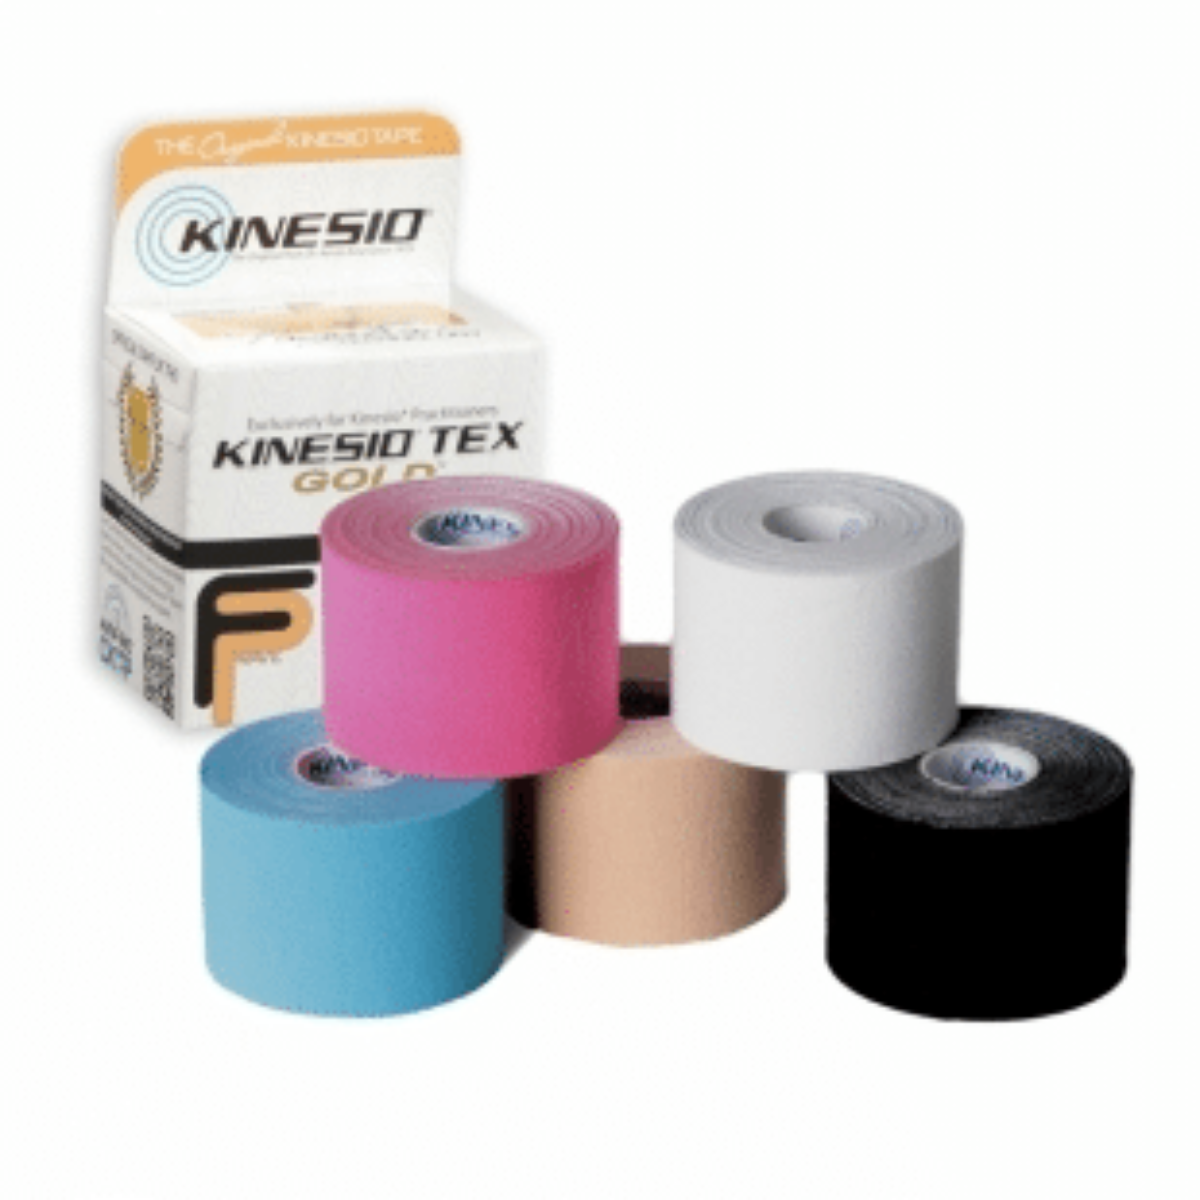  Kinesio Taping - Kinesiology Tape Tex Gold FP - Beige